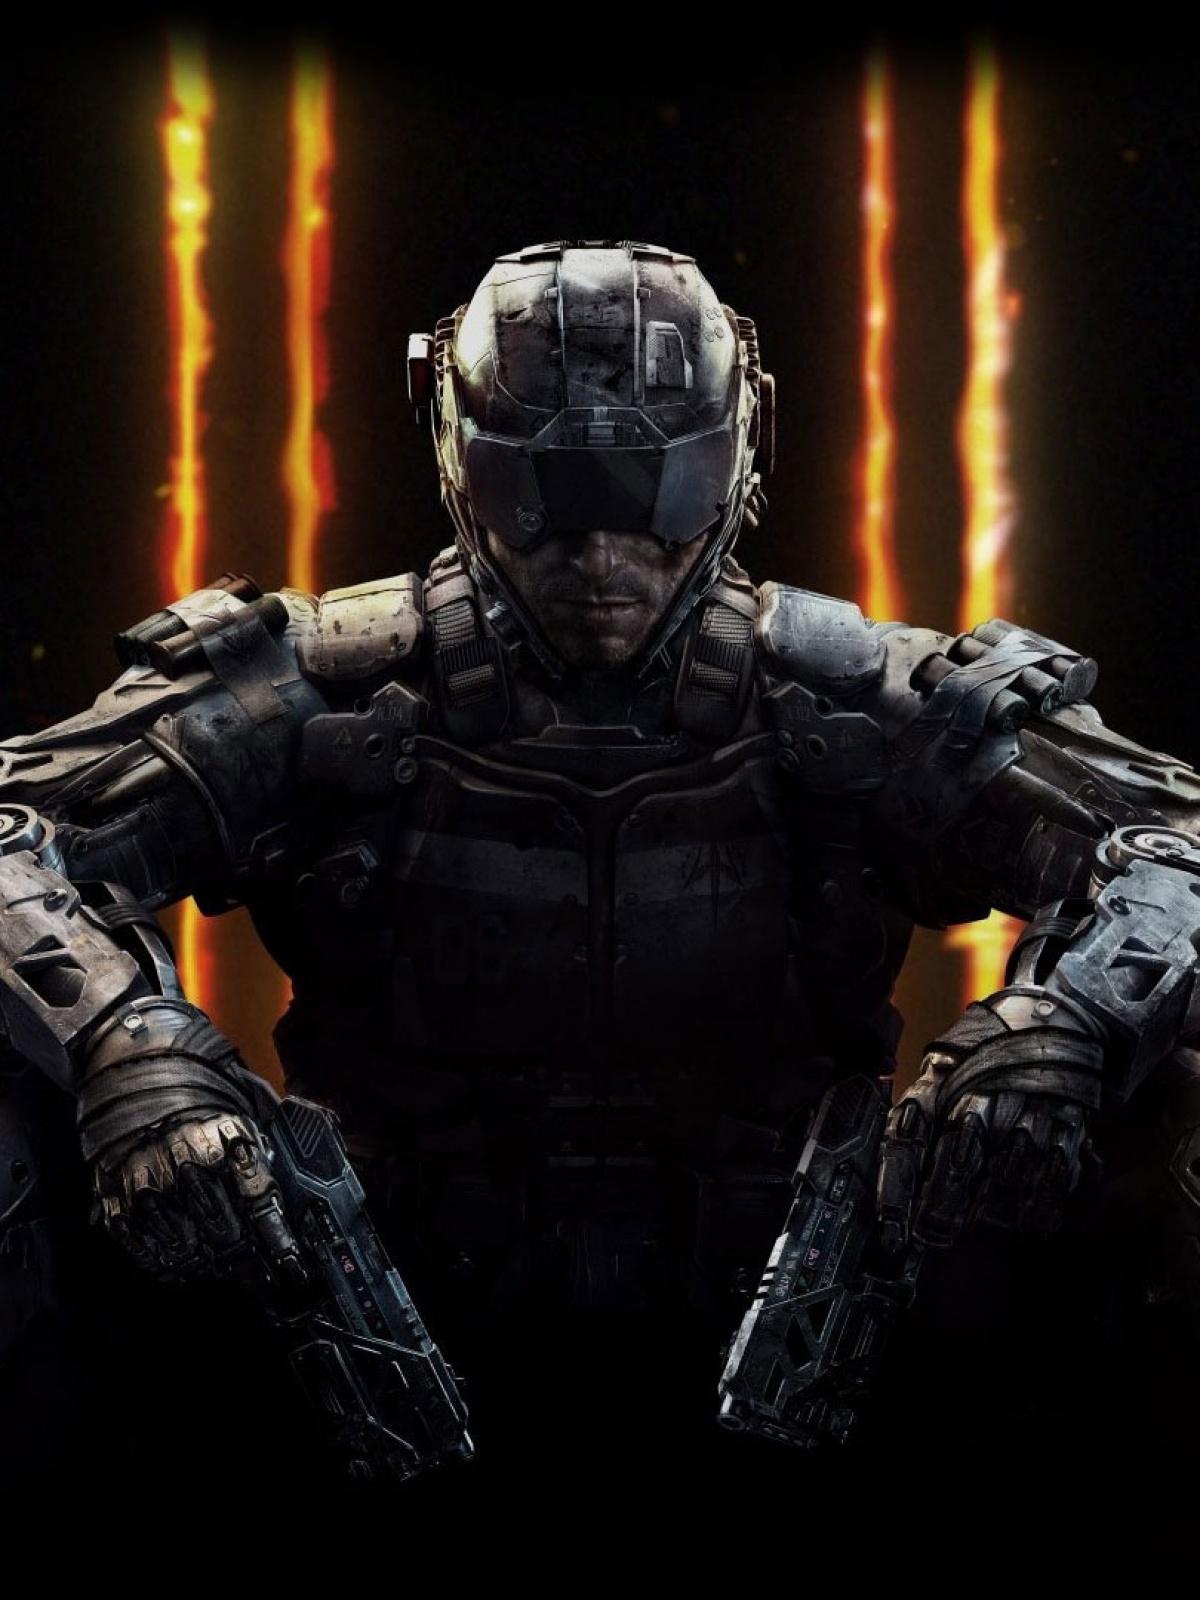 Call Of Duty Black Ops 3 Mobile Wallpaper